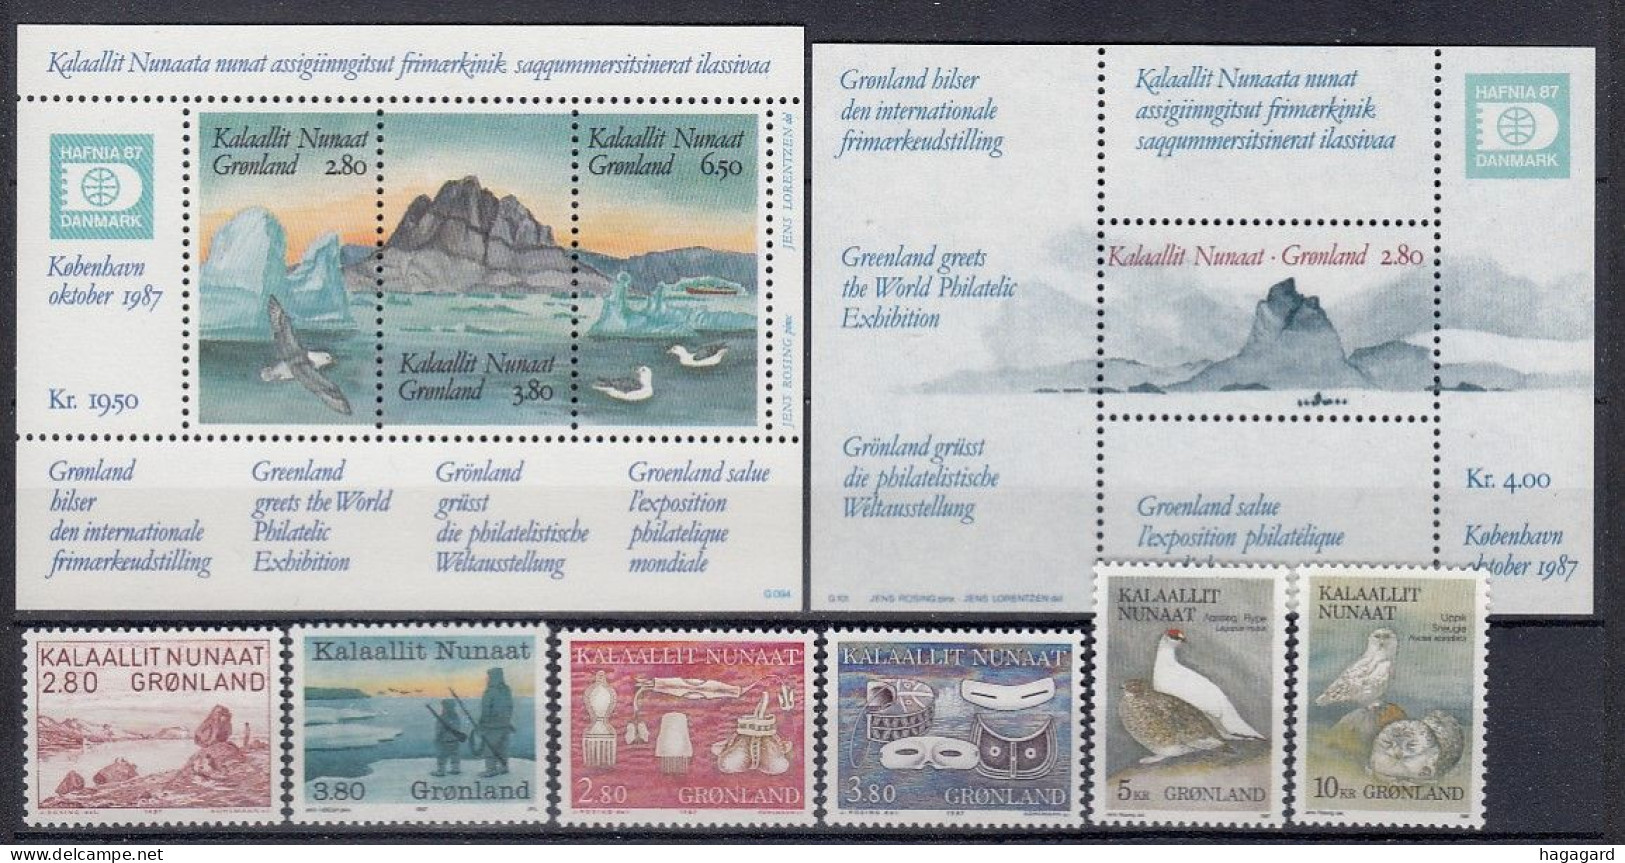 G2679. Greenland 1987. Complete Year Set. Michel 169-78. (20.20€). MNH(**) - Años Completos